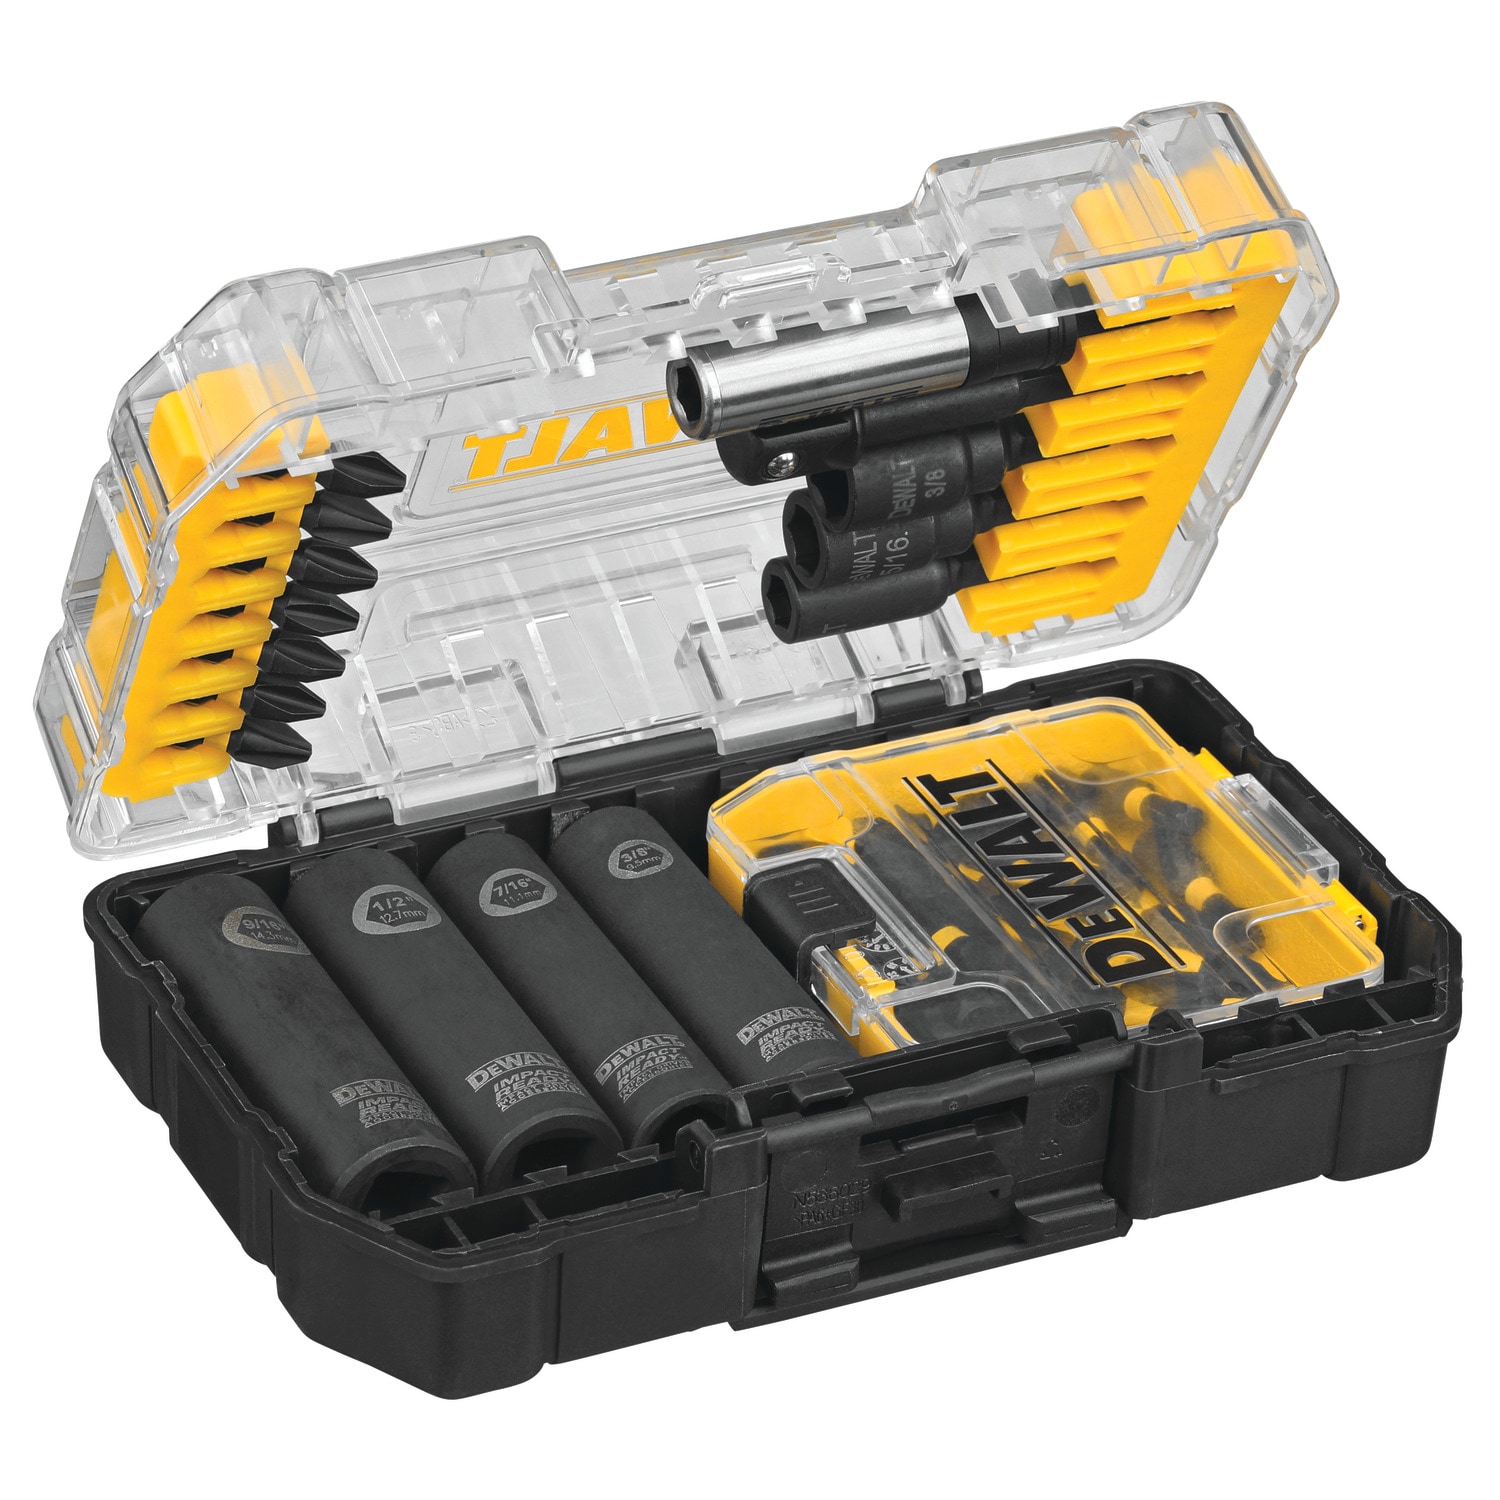 Has This DeWalt Drill-Driver and Impact Driver Kit for 35% Off